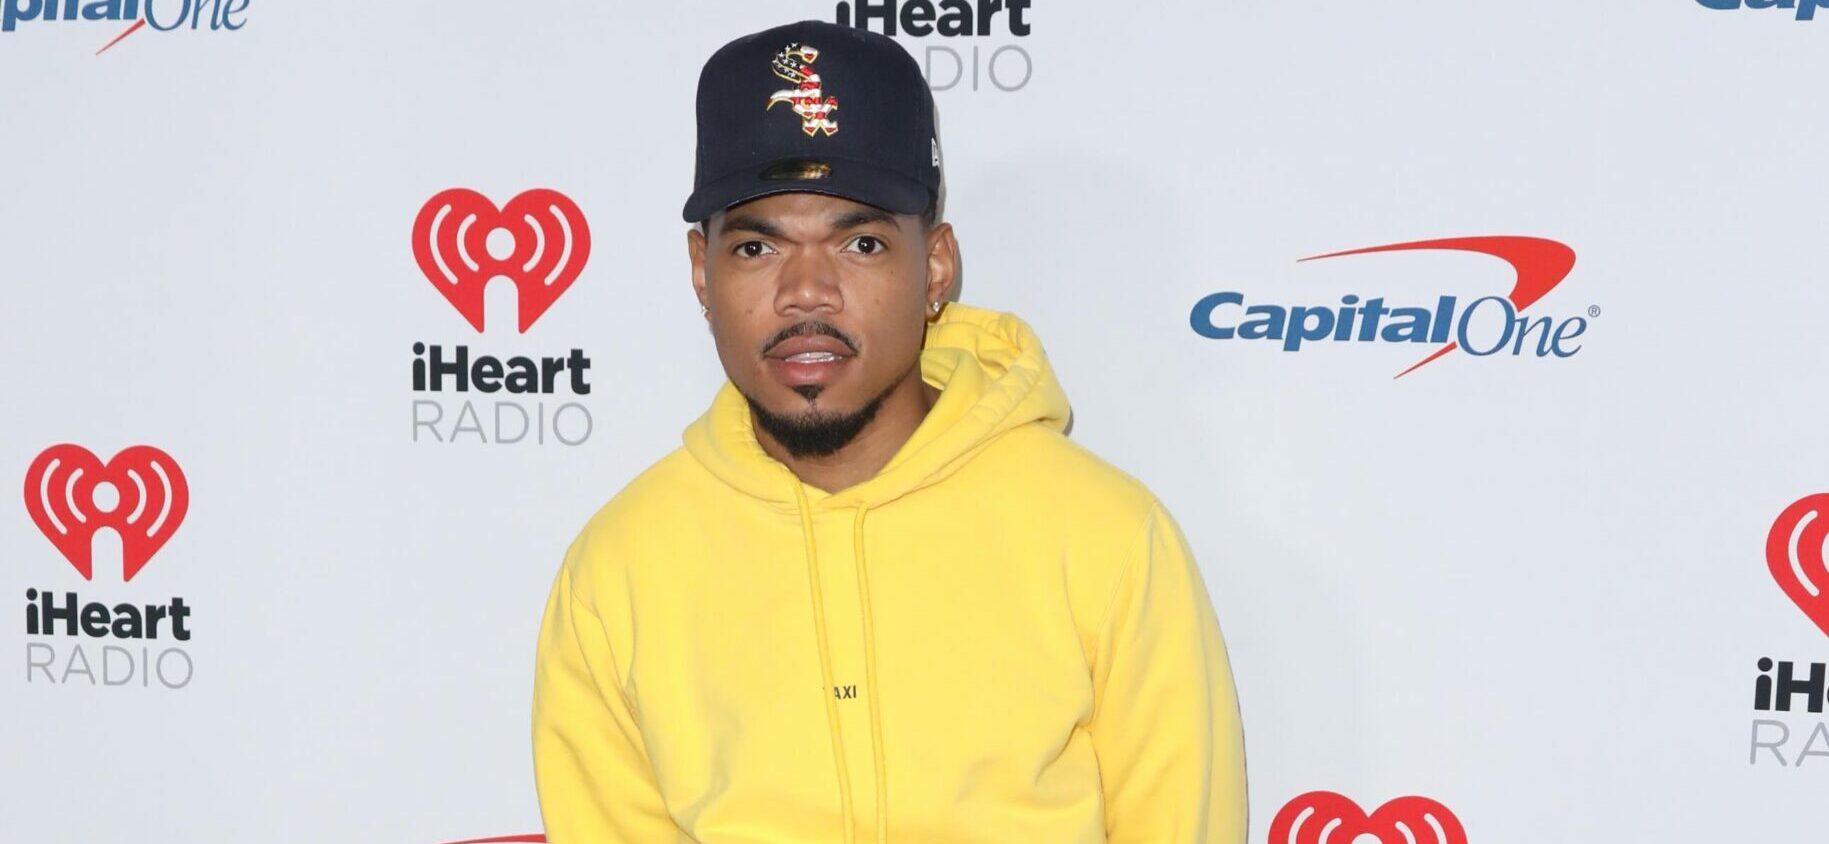 Chance the Rapper at the 2019 iHeartRadio Music Festival